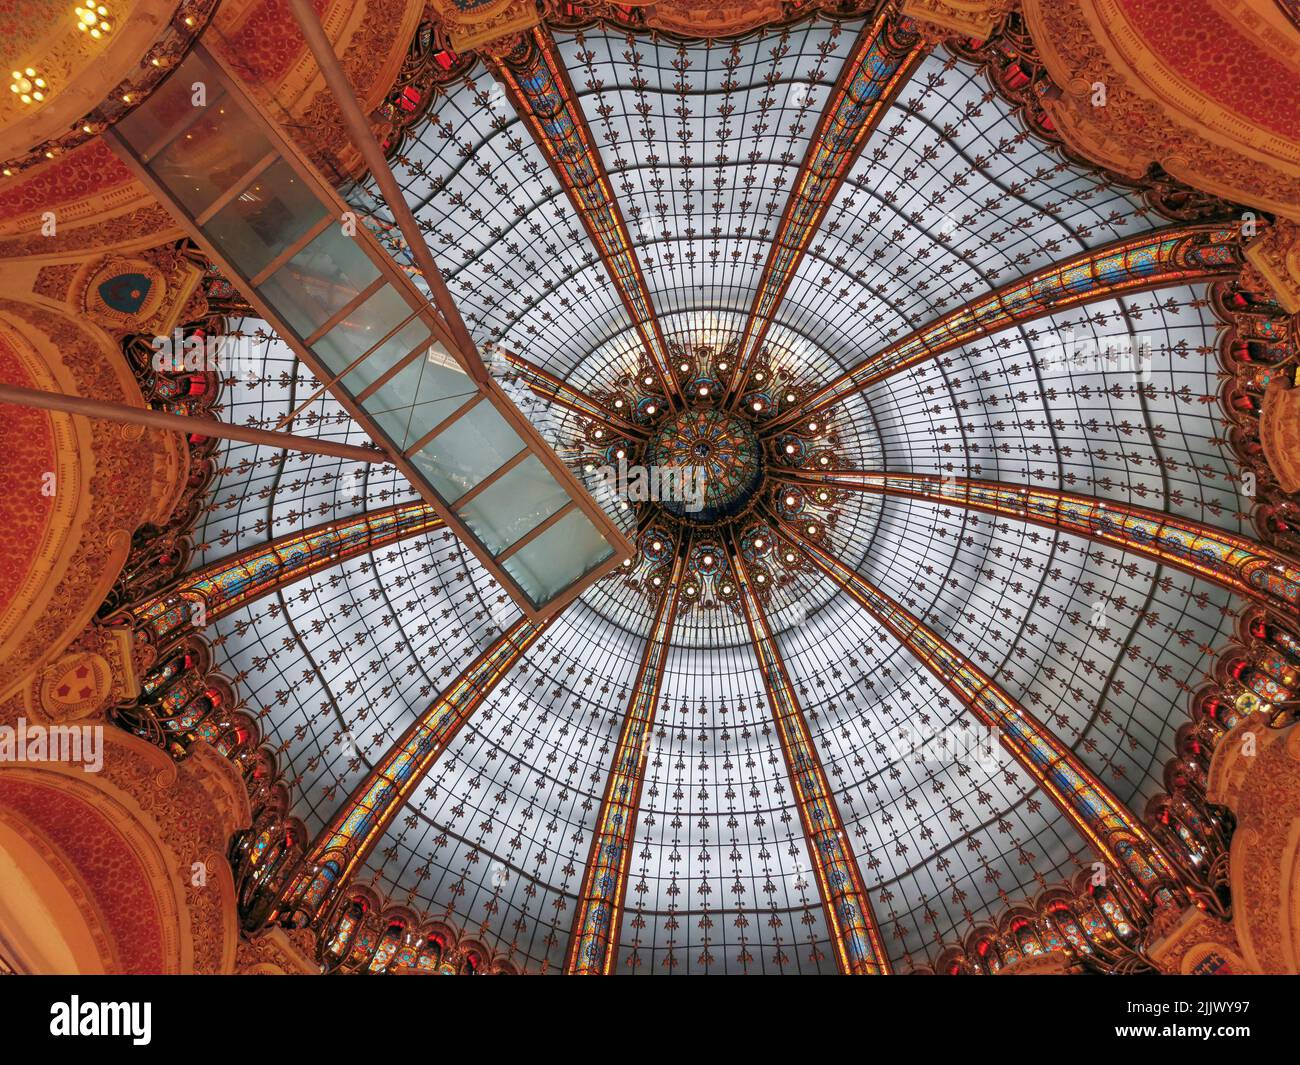 France, Paris, Galeries Lafayette a luxury shopping department store. The Galeries Lafayette offers its visitors a splendid glass Cupola, rising to a Stock Photo